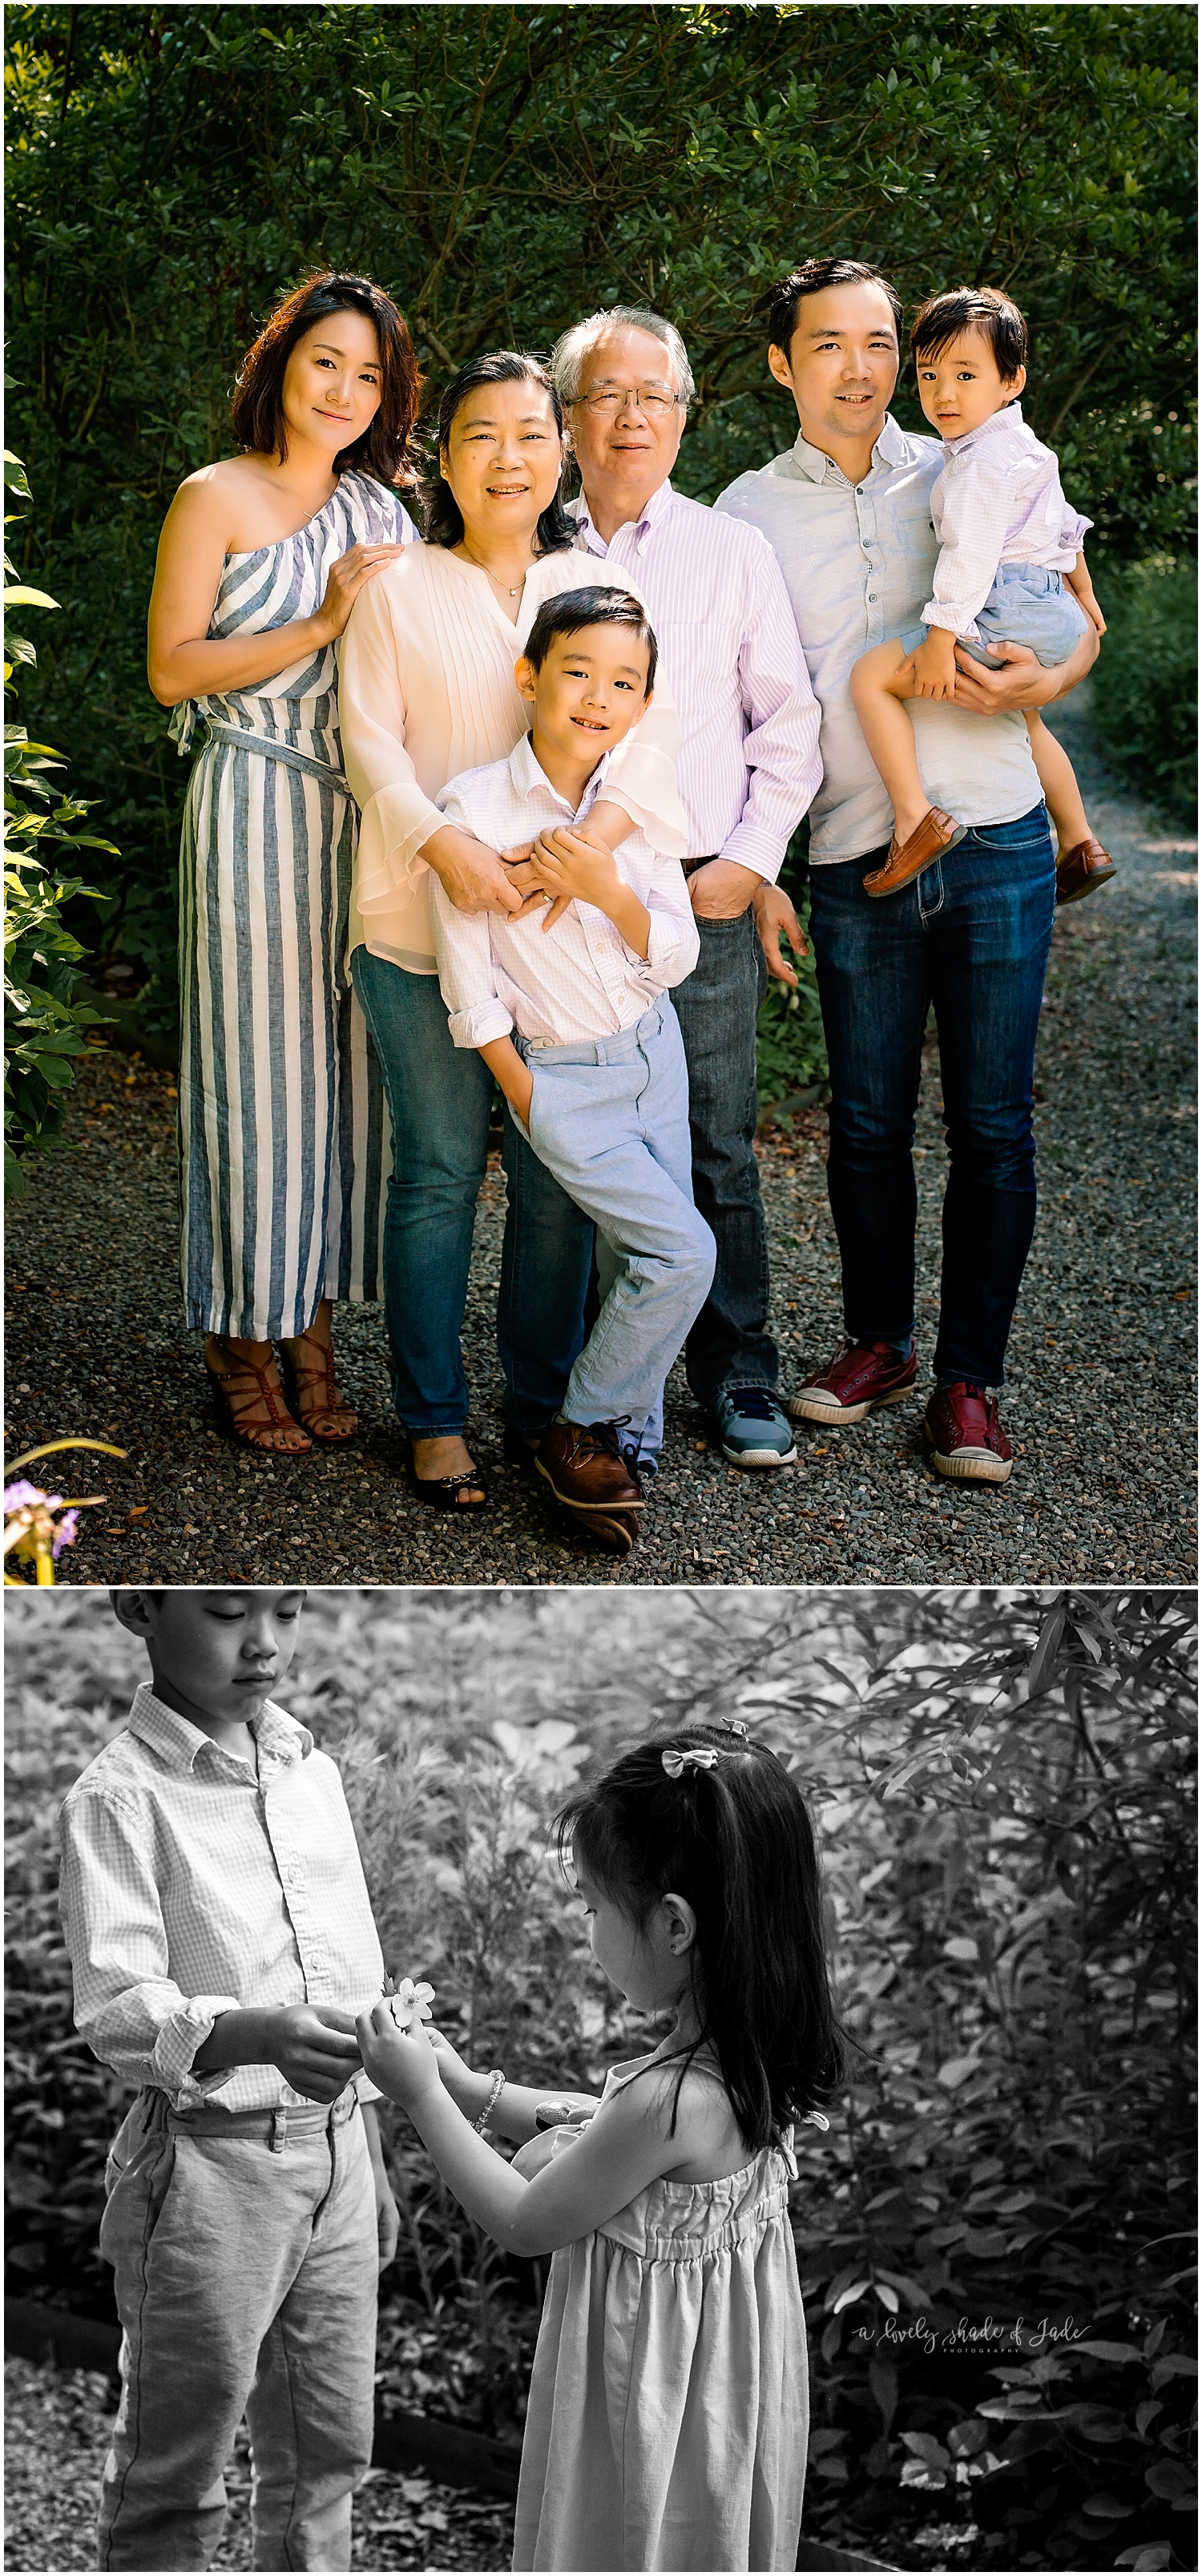 Fun_Extended_Family_Session_Morristown_NJ_Photography_0017.jpg